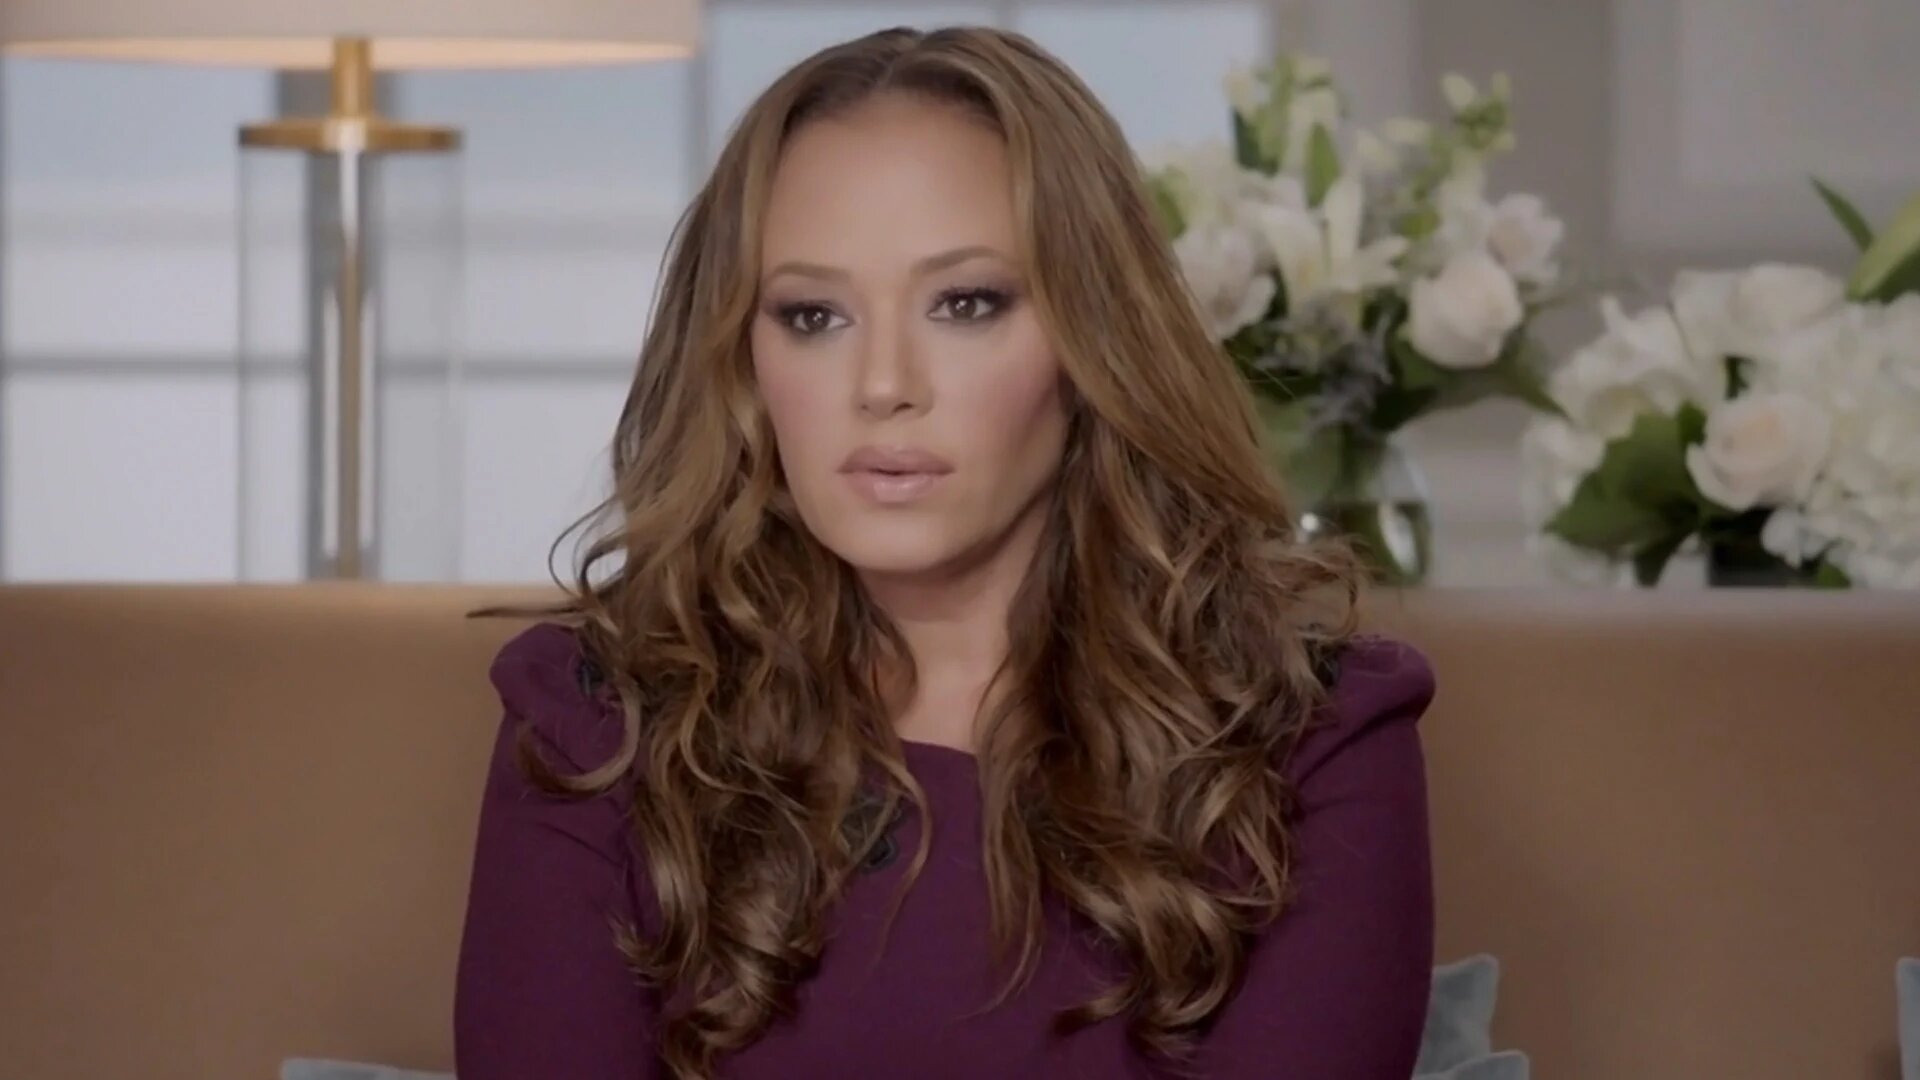 Leah Remini: Scientology and the Aftermath — s02 special-8 — Ask Me Anything Season 2